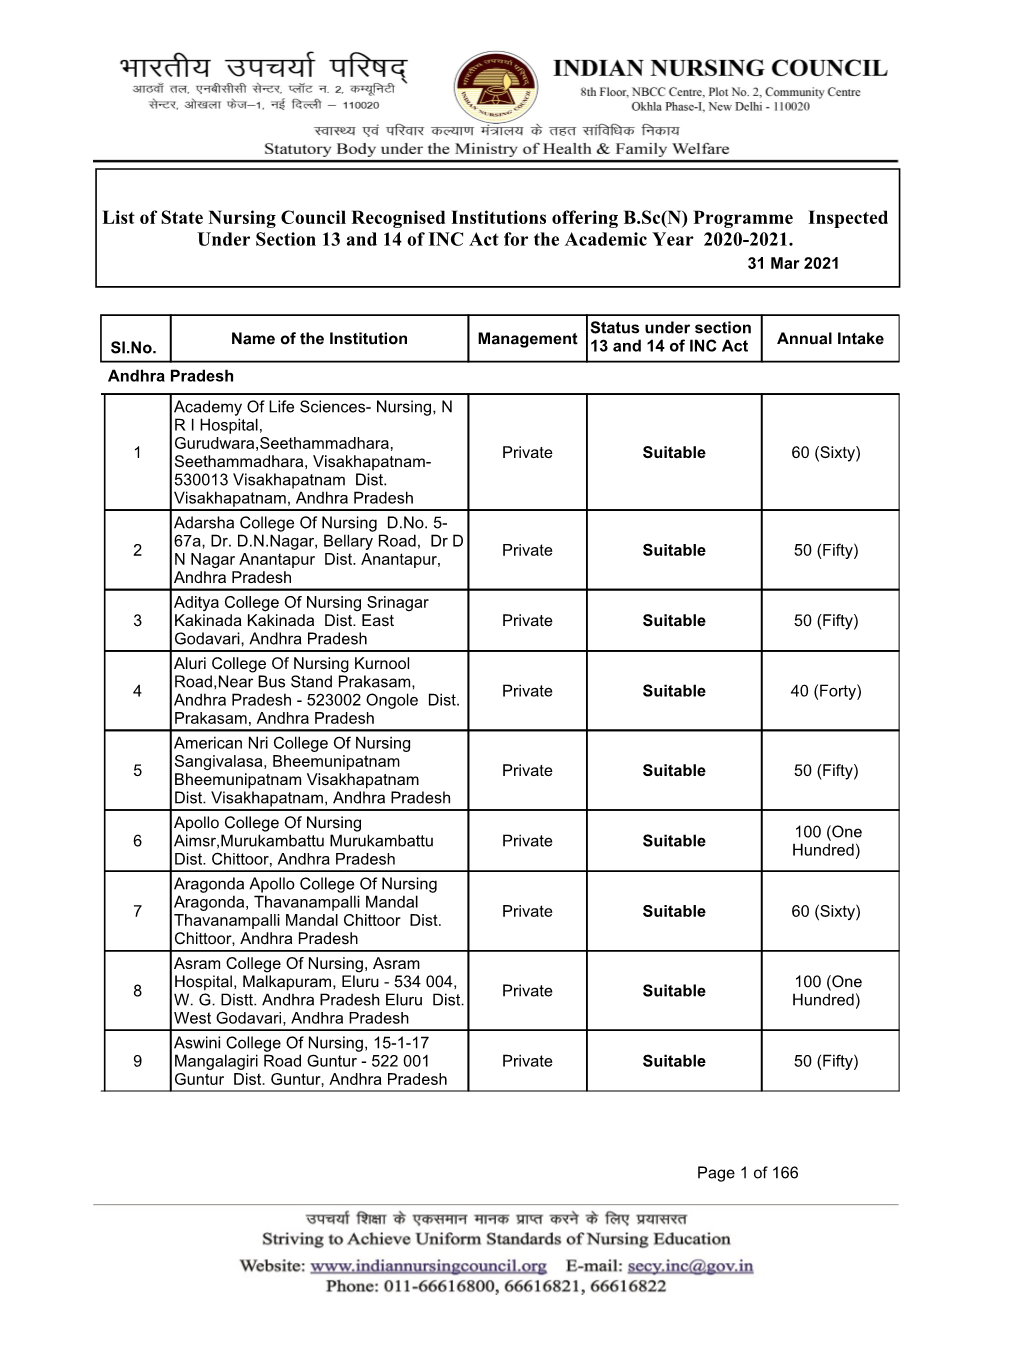 List of State Nursing Council Recognised Institutions Offering B.Sc(N) Programme Inspected Under Section 13 and 14 of INC Act for the Academic Year 2020-2021